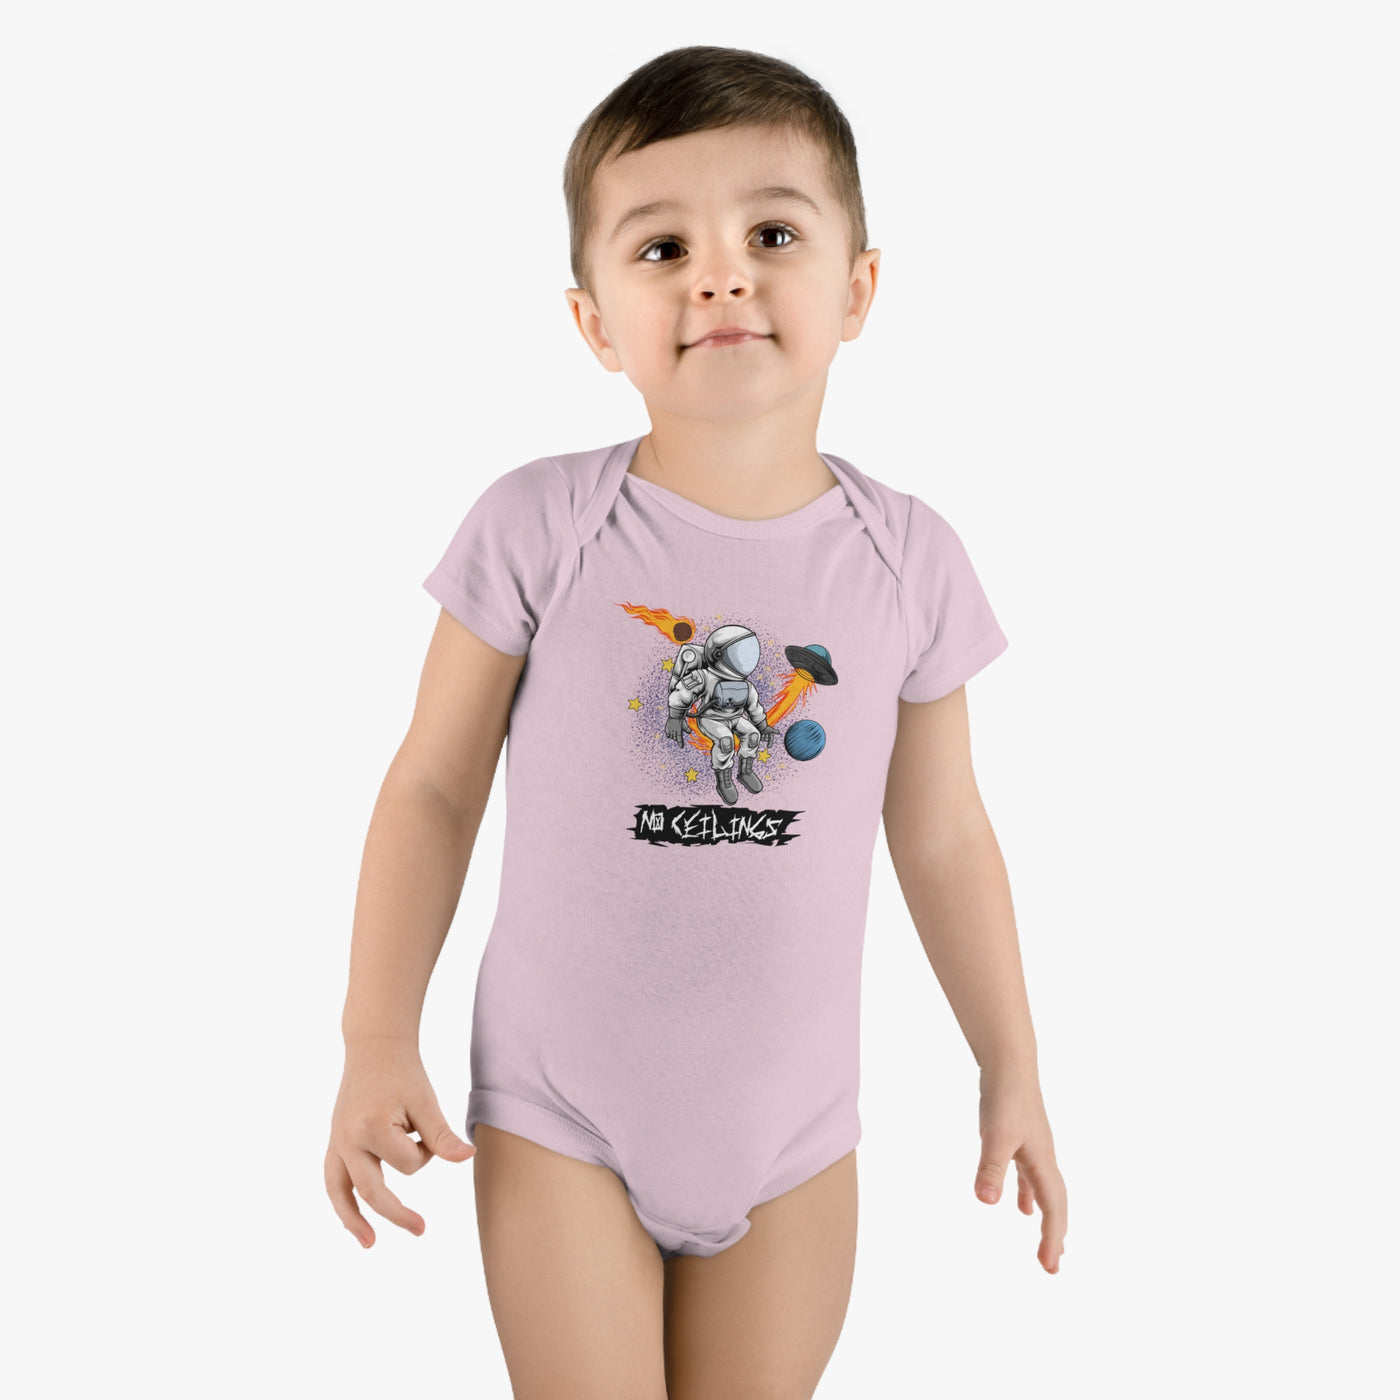 Noceilings out of this world Baby Short Sleeve Onesie®